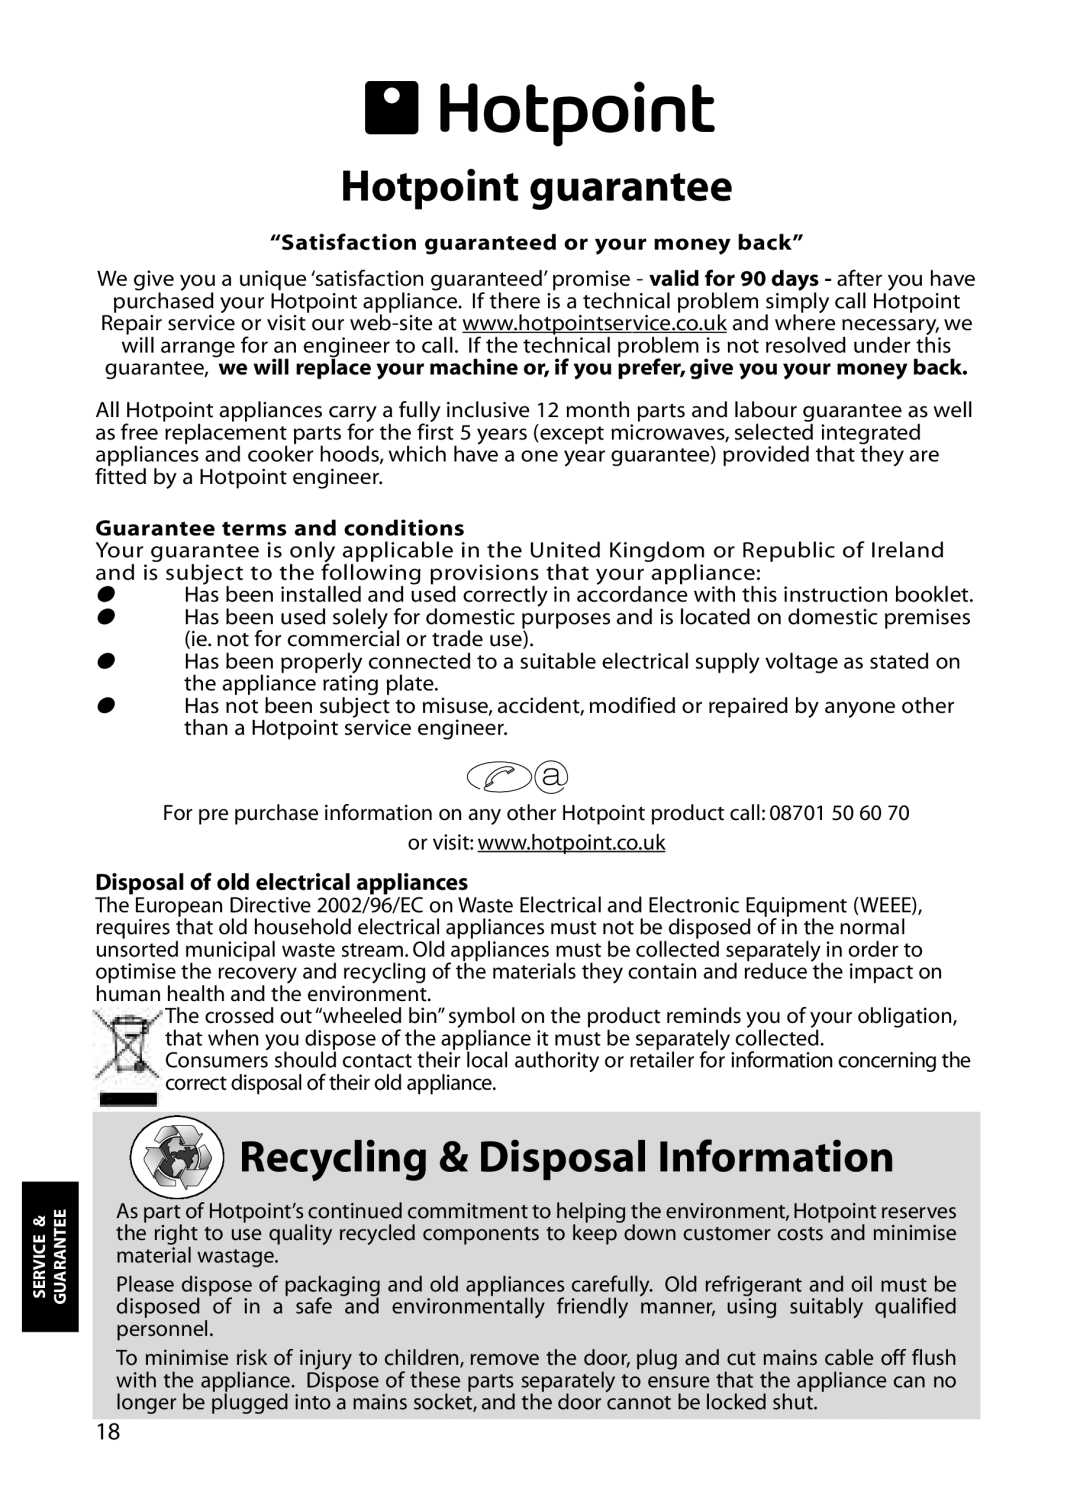 Hotpoint RLA84 manual Hotpoint guarantee, Recycling & Disposal Information, Disposal of old electrical appliances 